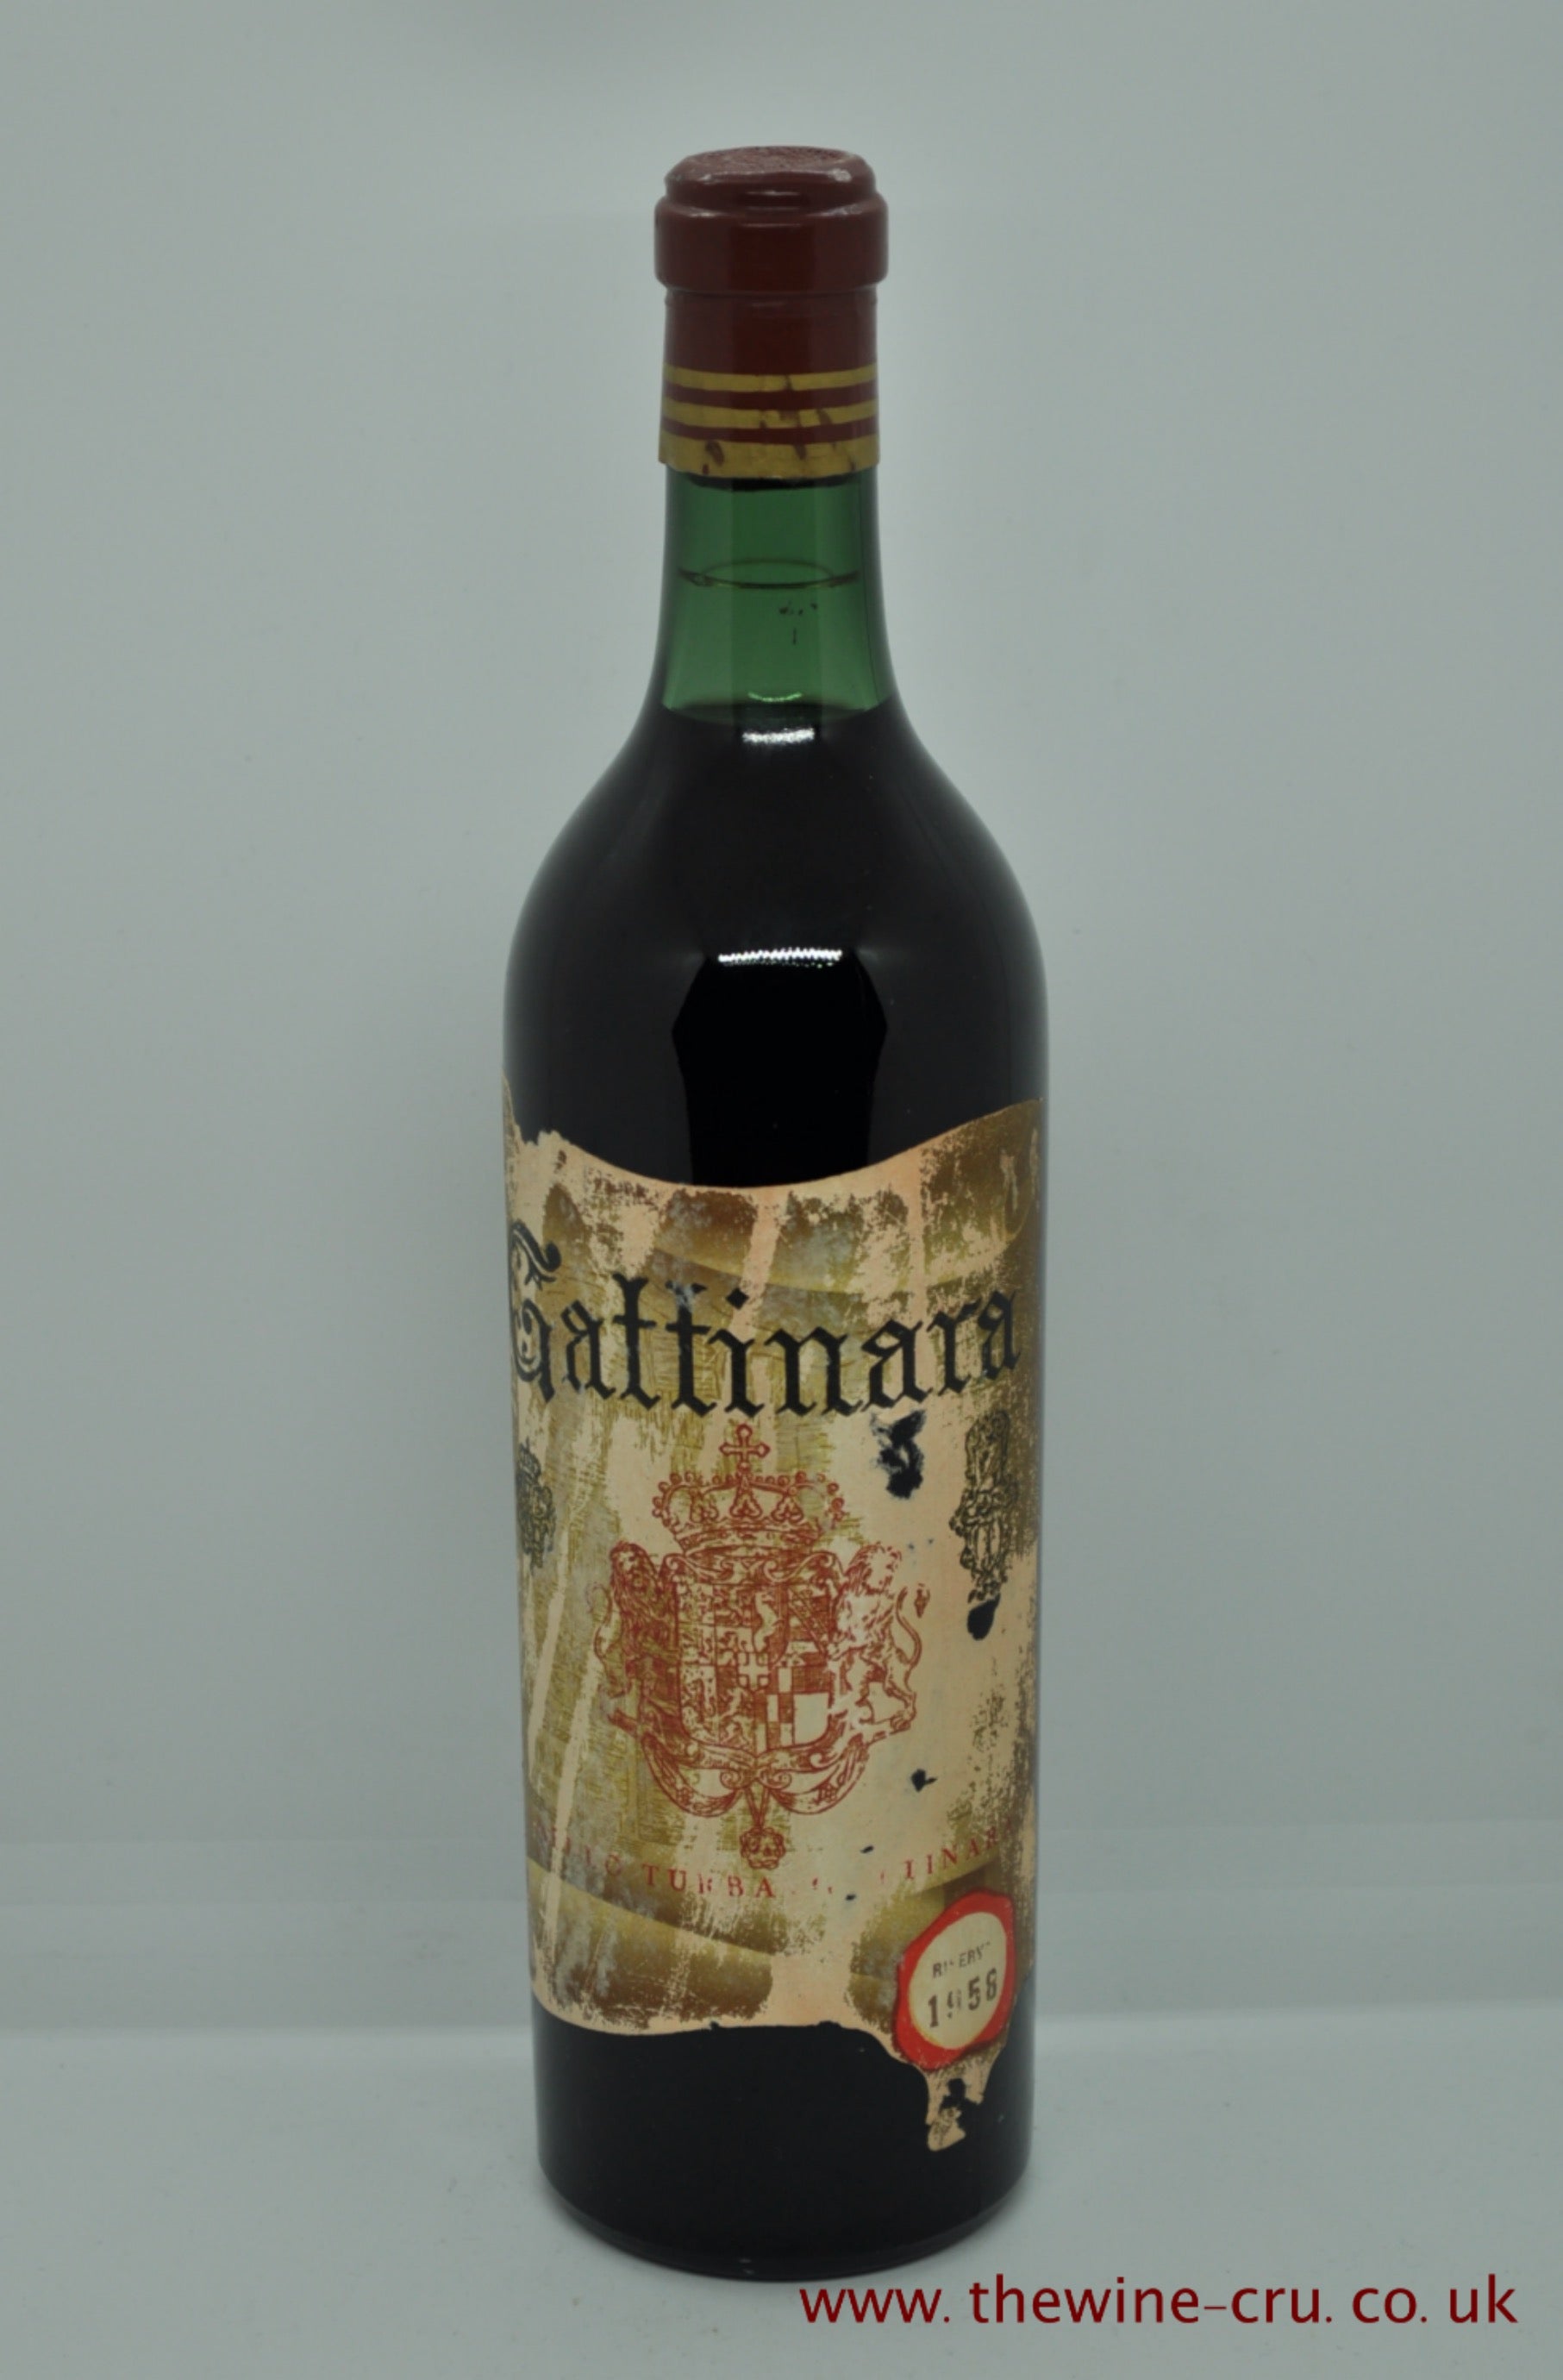 A bottle of 1958 vintage red wine. Amando Turba Gattinara Riserva 1958. Italy. Good capsule. The label is bin soiled with some of the writing a little faint. The wine level is base of neck. Immediate delivery. Free local delivery. Gift wrapping available.